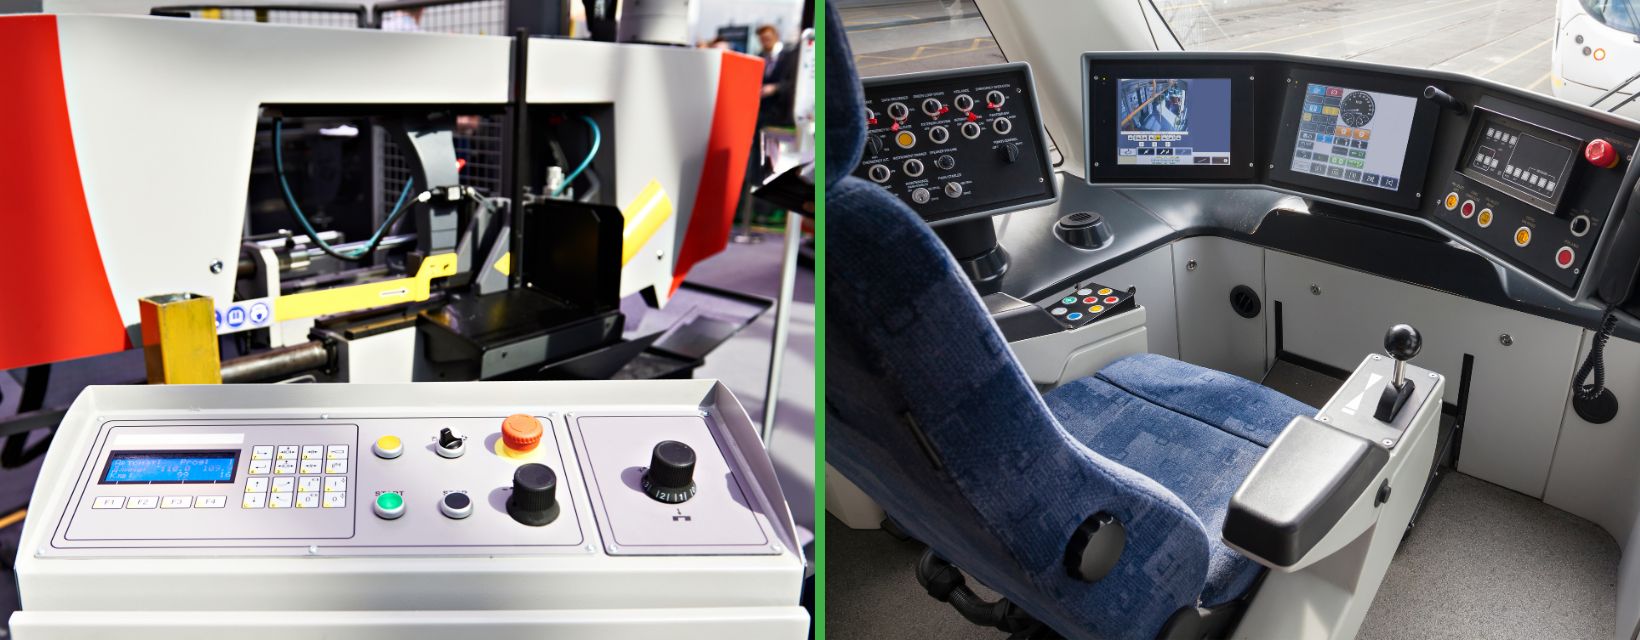 what makes a great HMI? industrial controls, transport controls, bus controls, e-stops, emergency stop, push buttons, human machine interface, LED switches, RJS Electronics Ltd